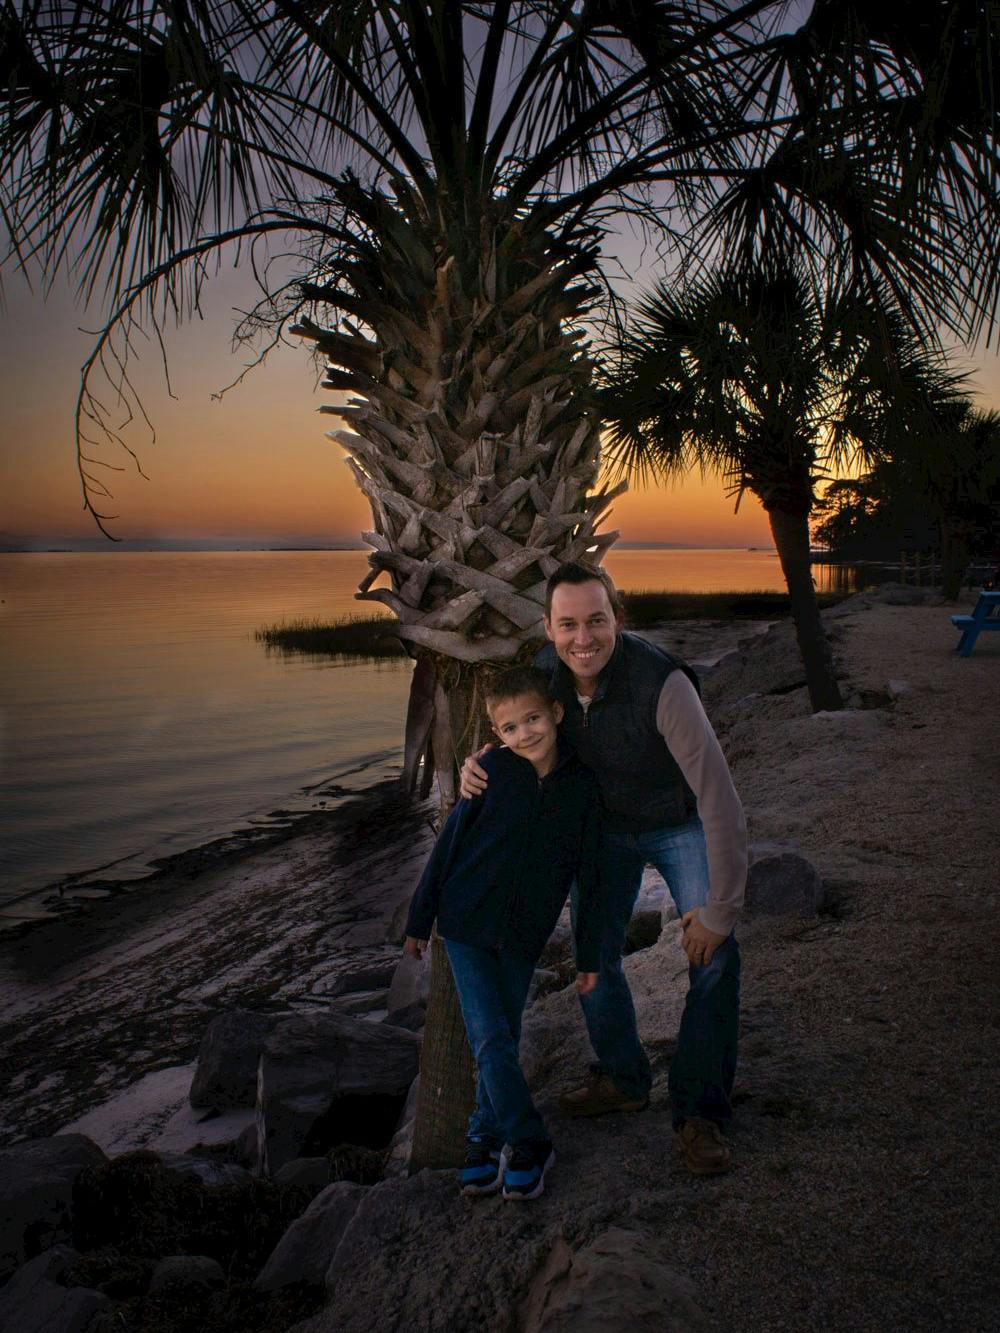 Blog photo Hangin' with the Hagens in Ho-Hum RV Park Lou and Travis Hagen posing in front of Palm Tree at park